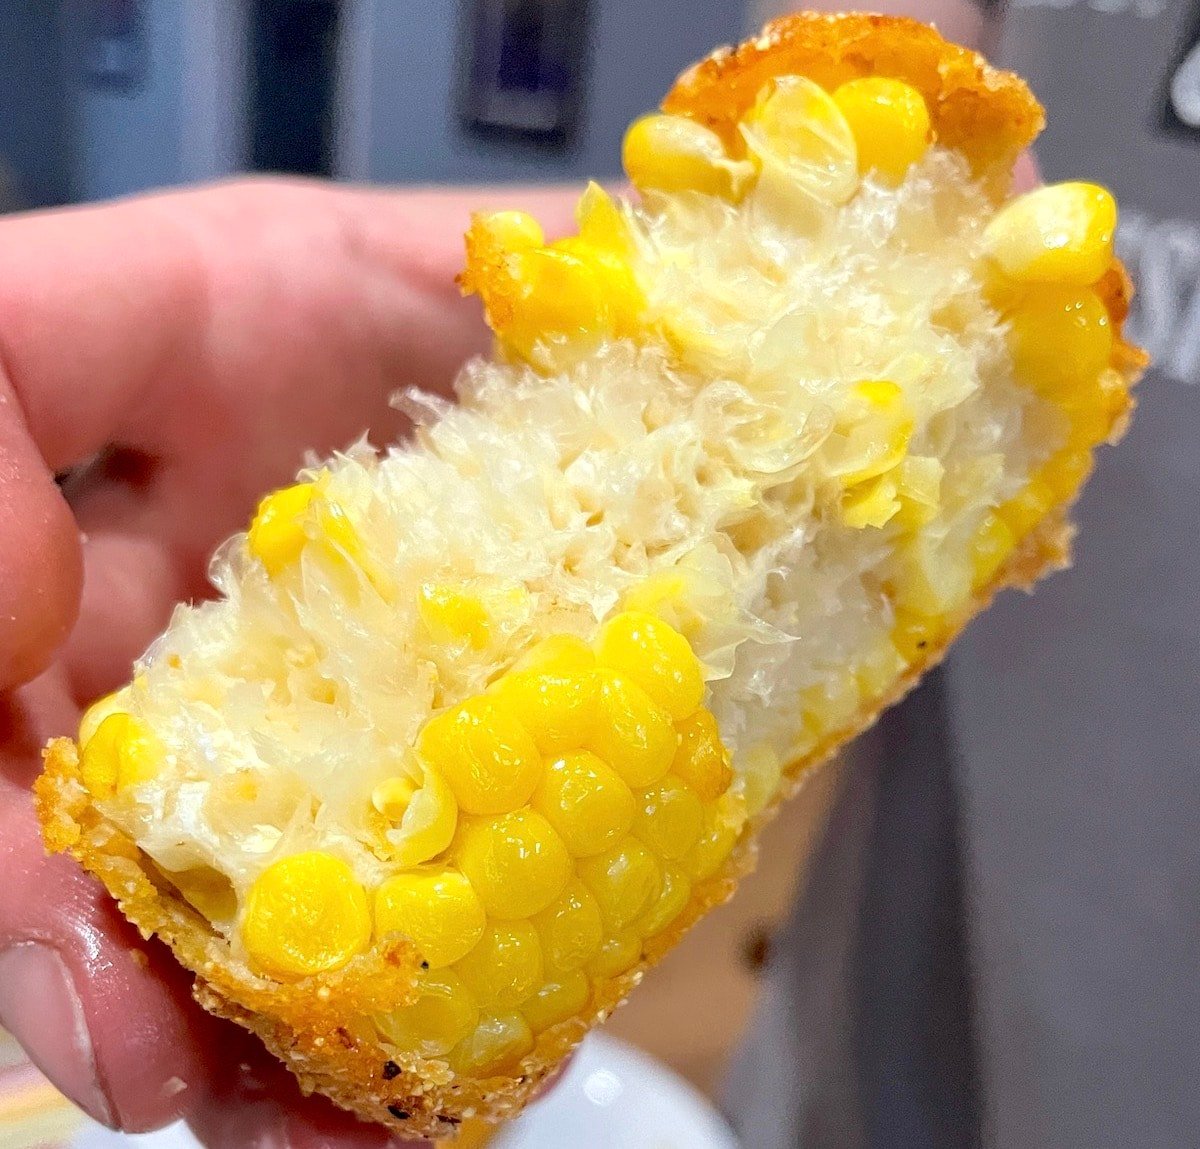 A hand holding a piece of fried corn on the cob with a few bites taken out of it.